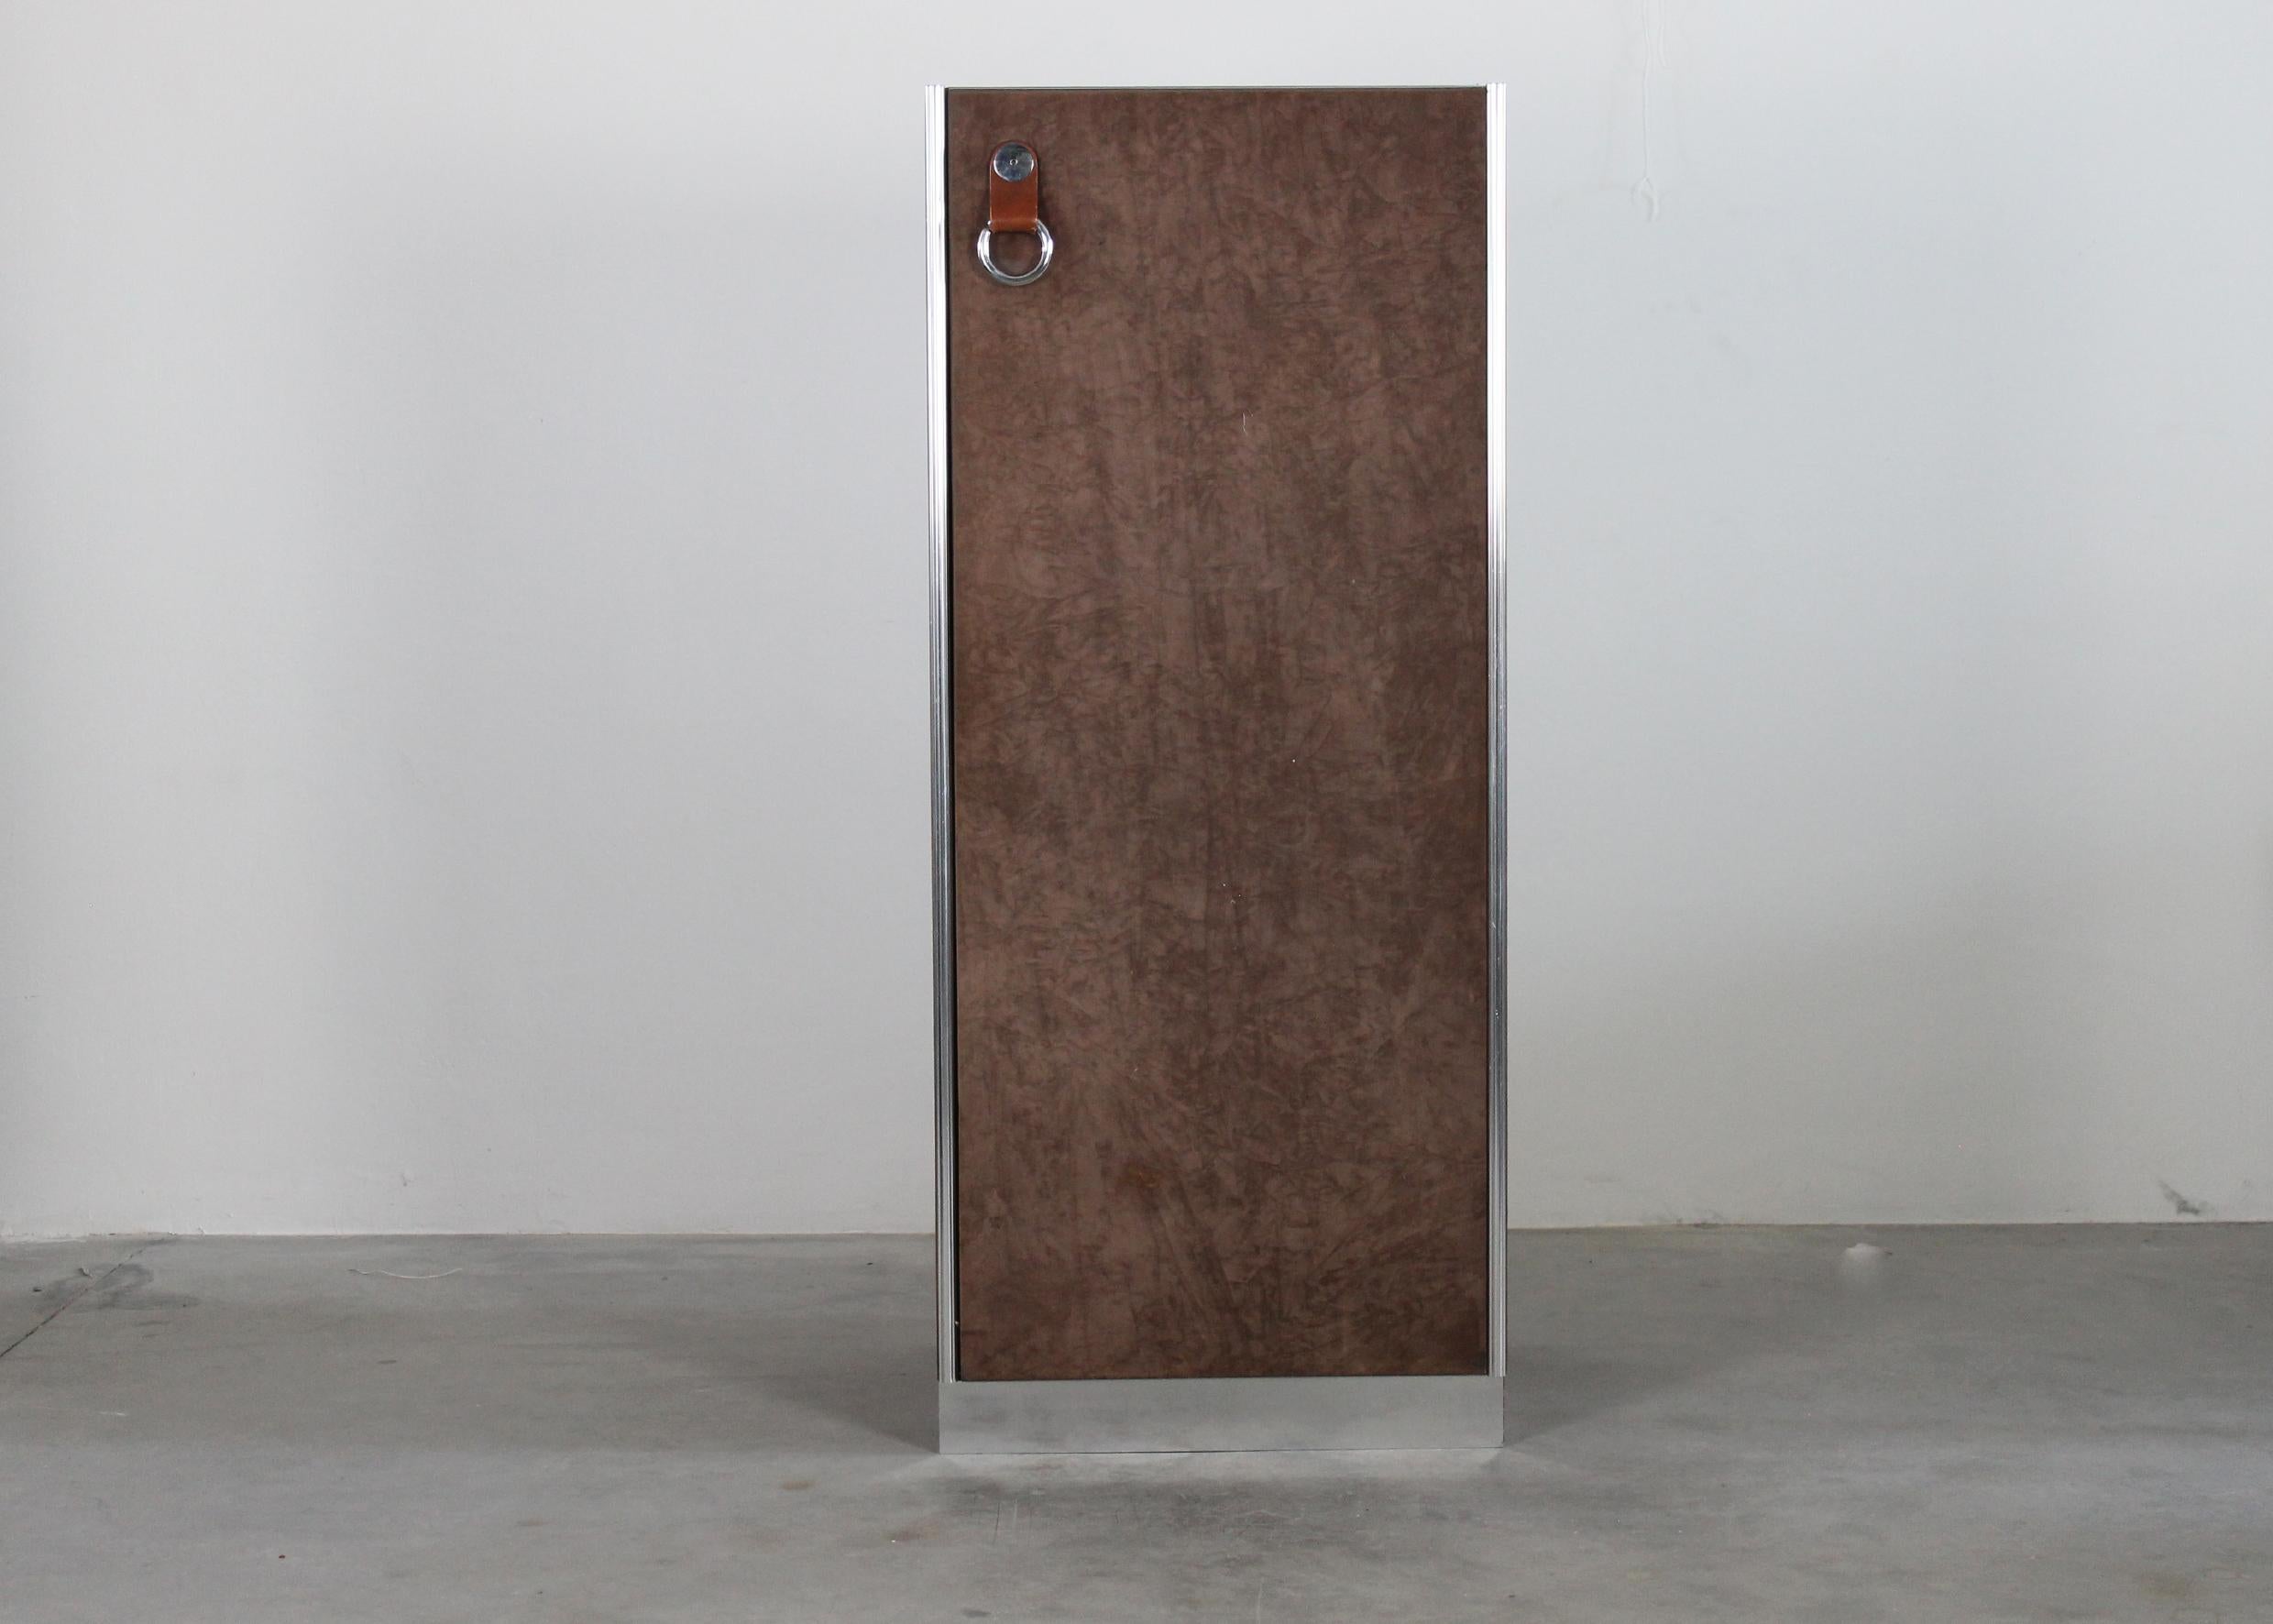 Wardrobe with suede clad panels, each panel is surrounded by a chromed steel frame and presents metal ring shape handles on the frontal part.

This cabinet was designed by Guido Faleschini as part of the Pace Collection for Italian furniture company